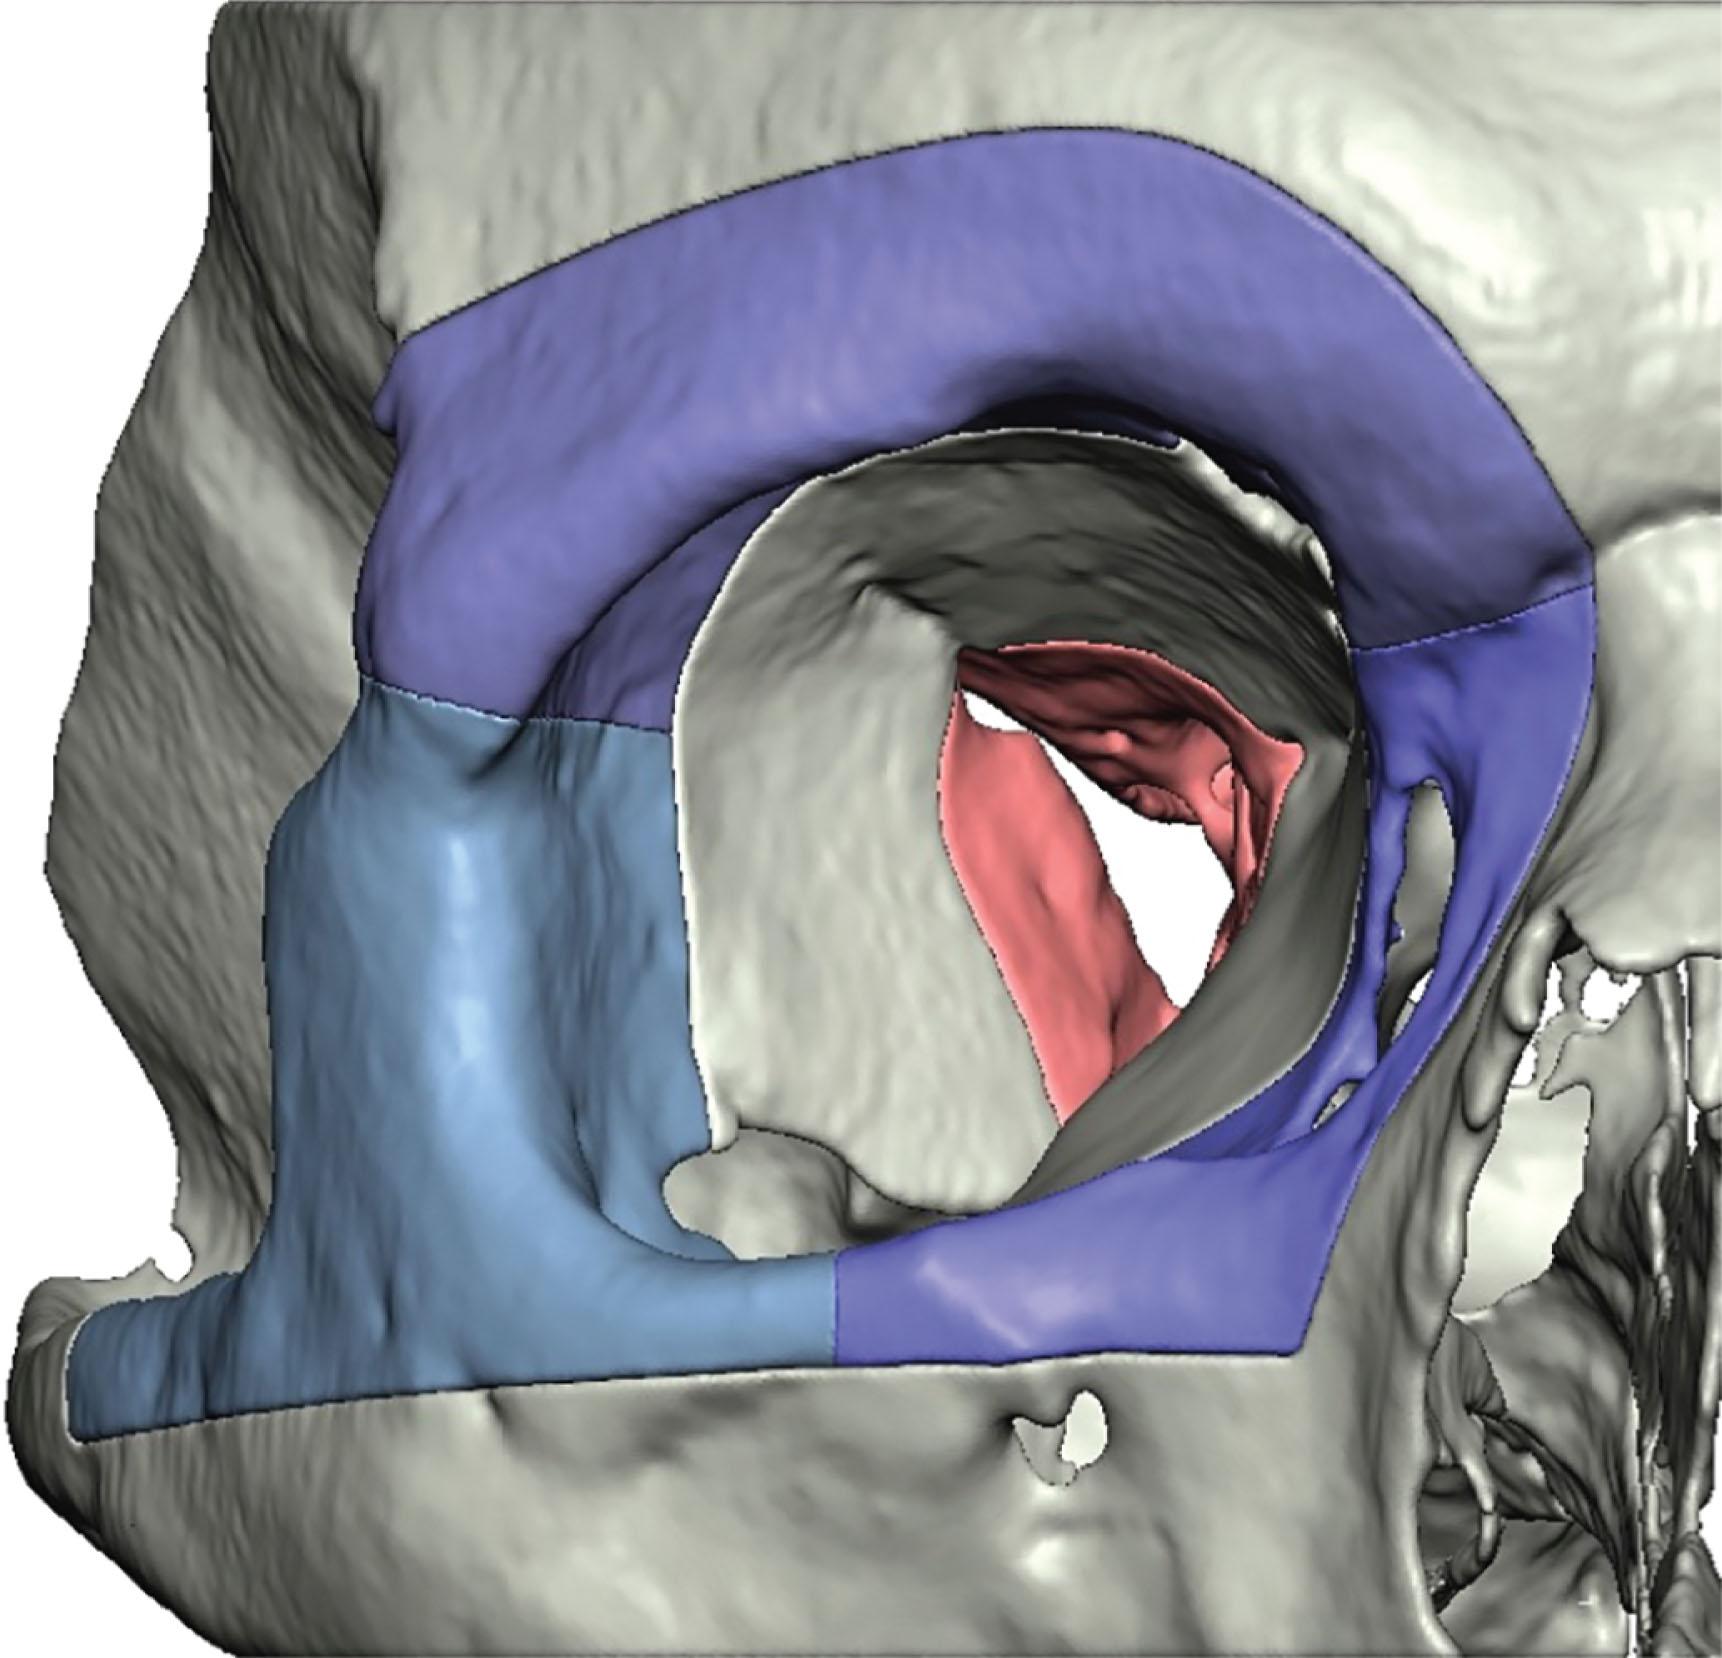 Figure 5.2, The bony orbit is subdivided into two main components for surgical considerations. The deep orbital cavity or orbital apex (red) is the fixed segment of the orbital cavity which accommodates the critical structures passing through the optic foramen and superior orbital fissure. The circumferential bony rim of the orbit is composed of thick resilient bone which defines the shape and dimensions of the orbital aperture (shades of blue/purple). The latter is the movable orbit, which can be safely transposed in any direction, in one or multiple segments (supraorbital, nasoethmoid, and/or orbitozygomatic).